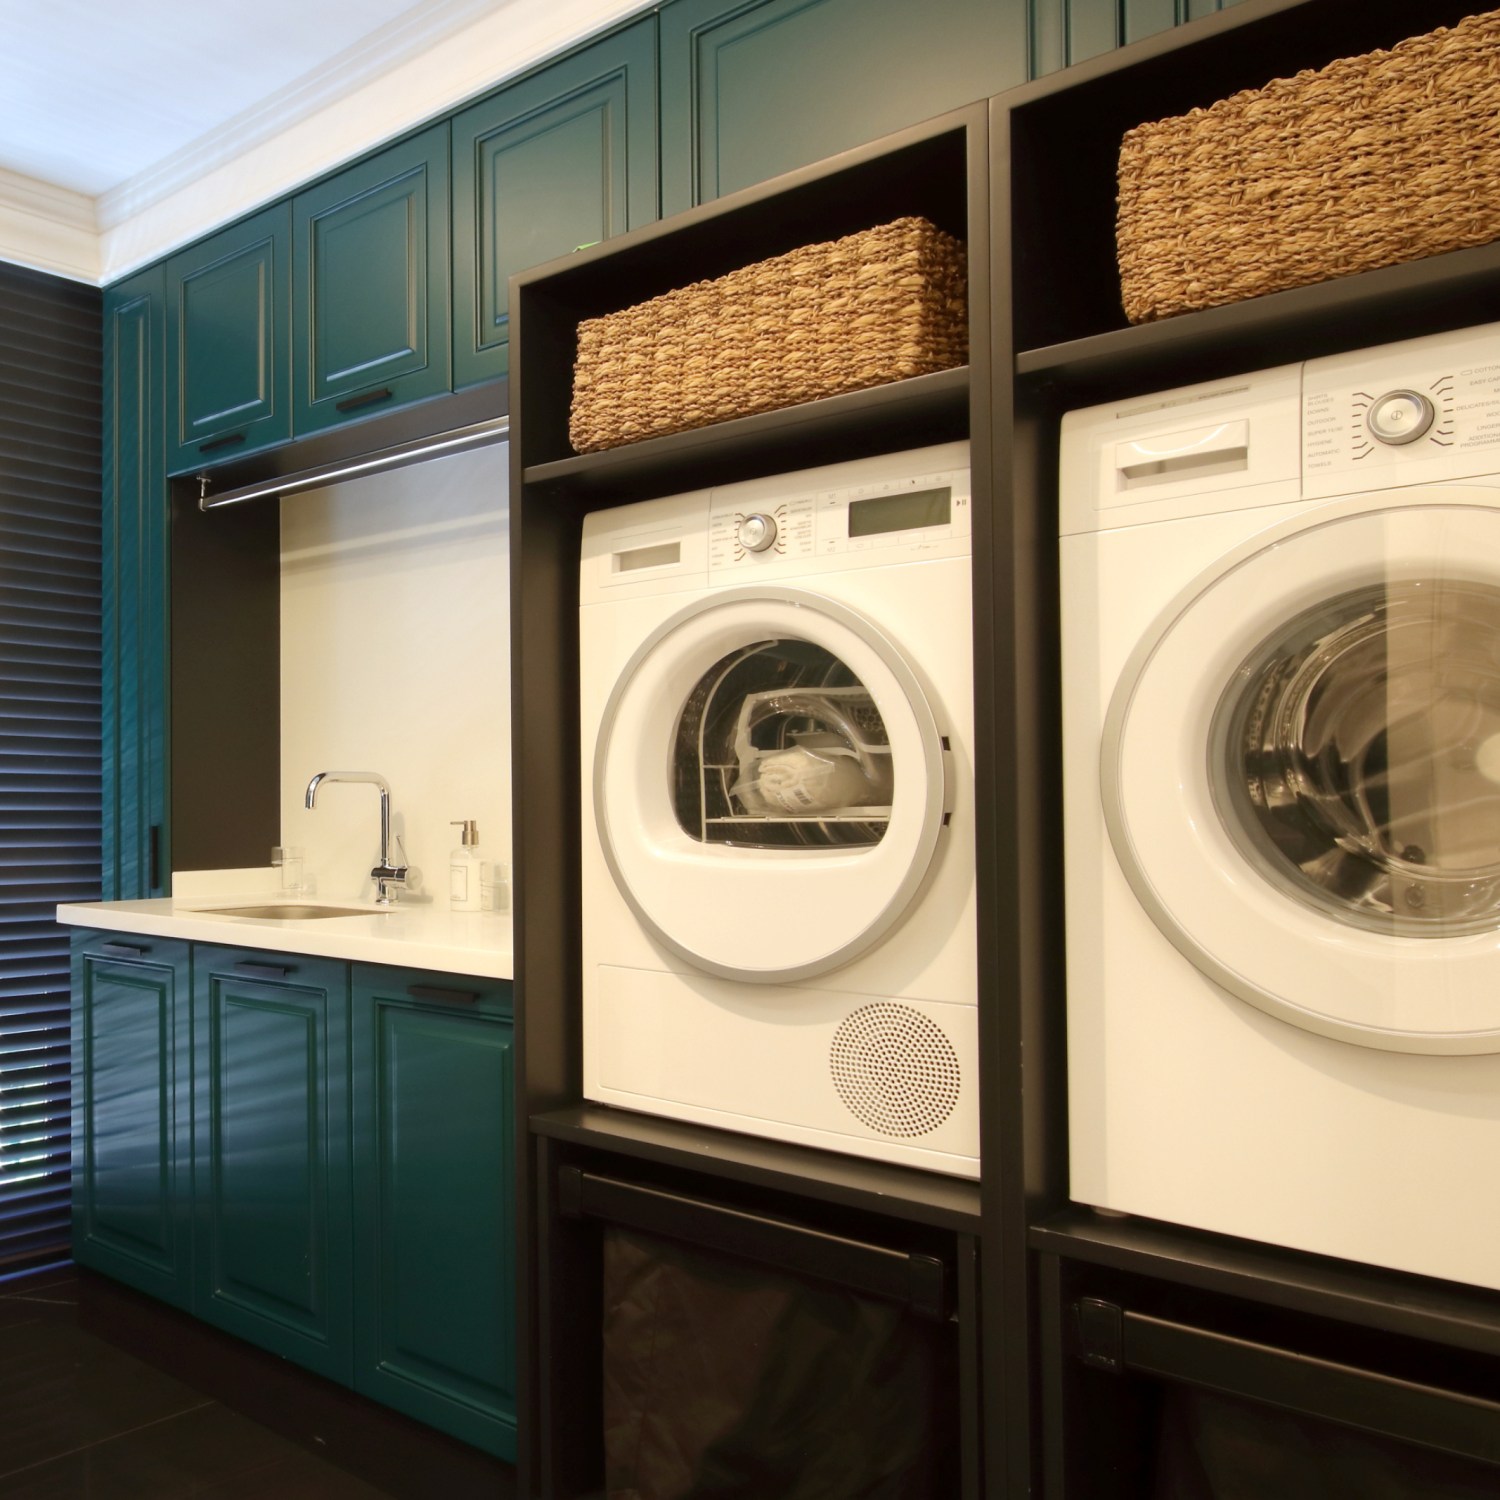 how to have an efficient and organized laundry room image of front loading washing machines built in with extra storage in a utility room with dark green cabinets and white counter with sink